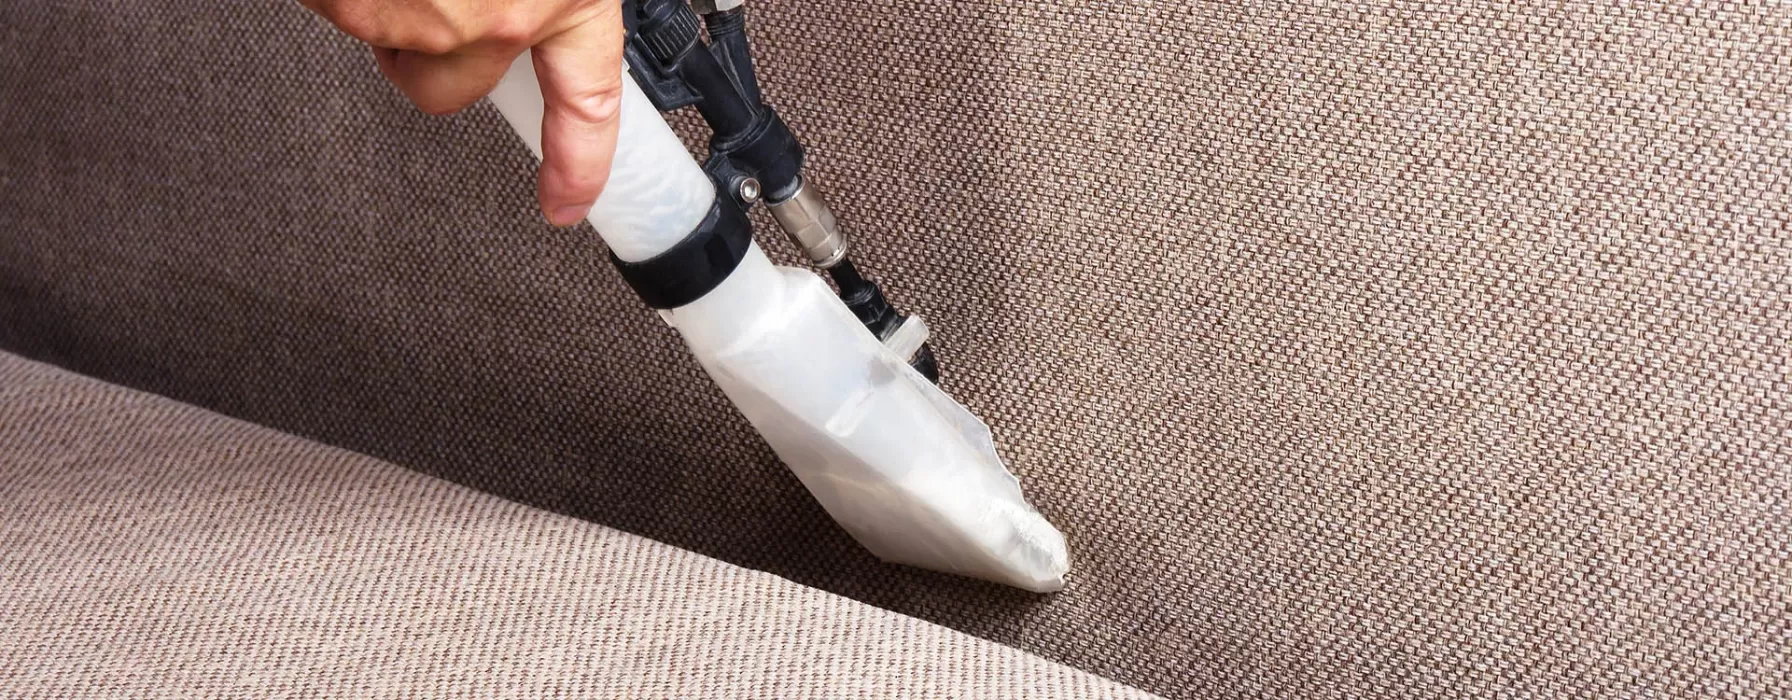 Carpet and Upholstery Cleaning Boynton Beach